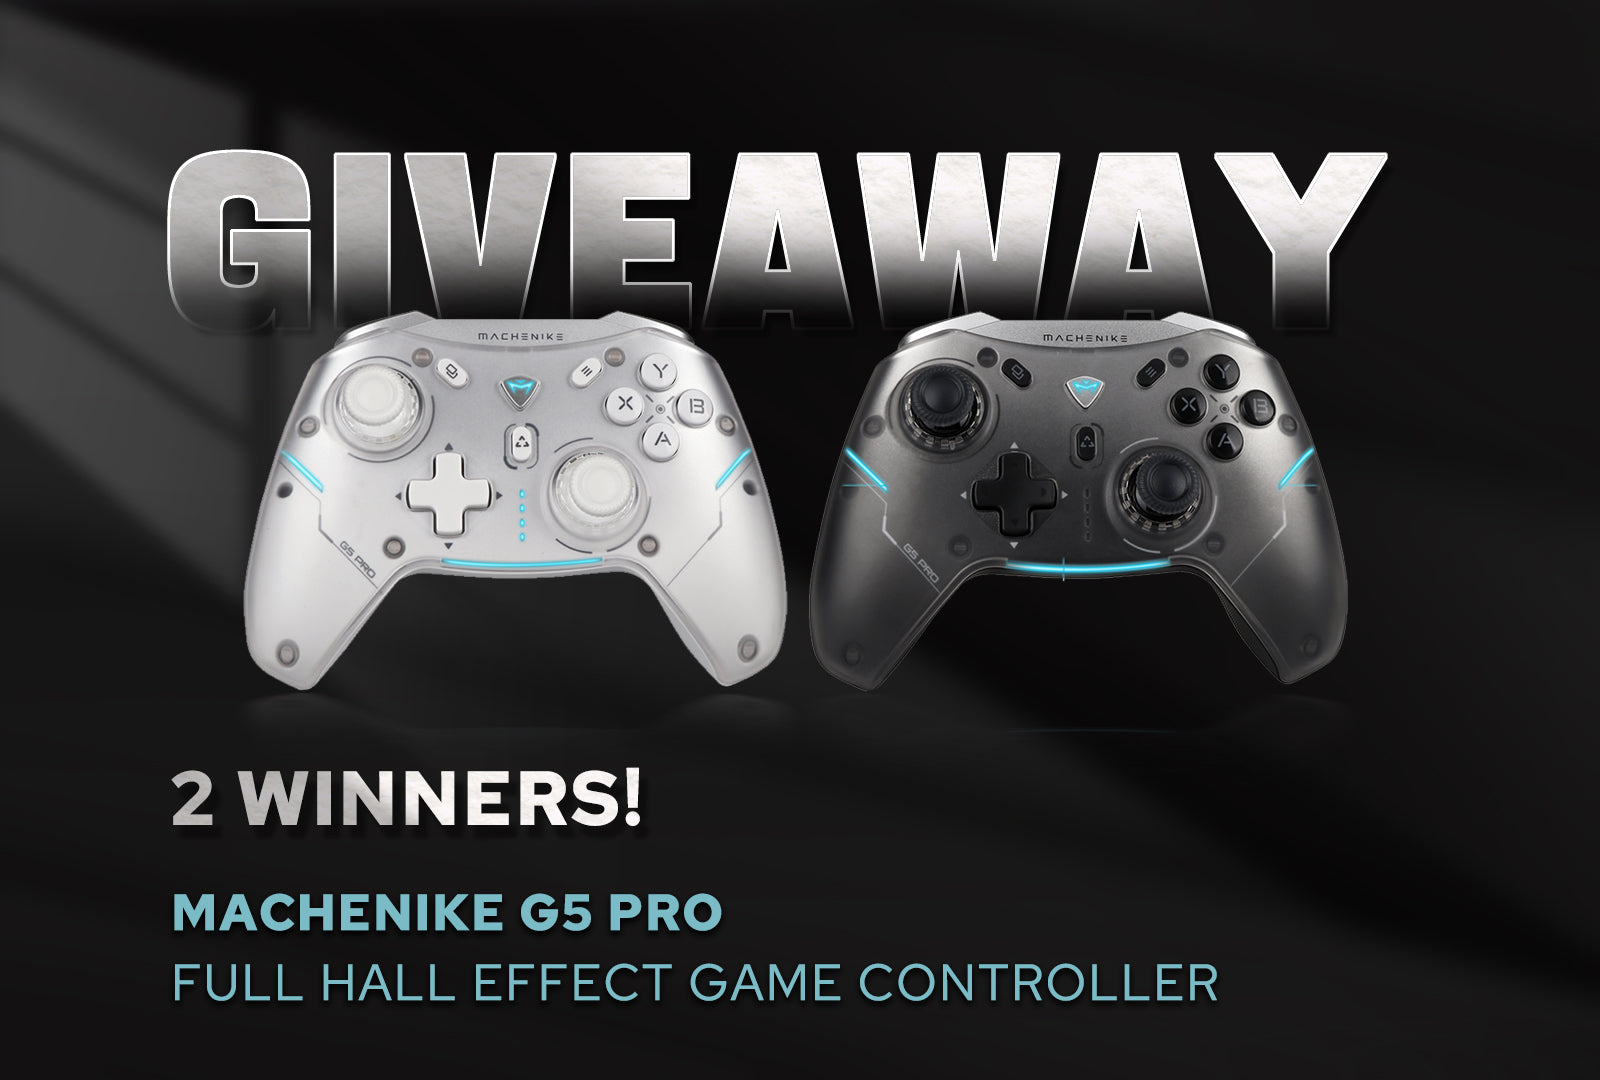 Full Hall Effect Game Controller Machenike G5 Pro Elevates Your Gaming Experience! Join Our Giveaway to Win a FREE One!